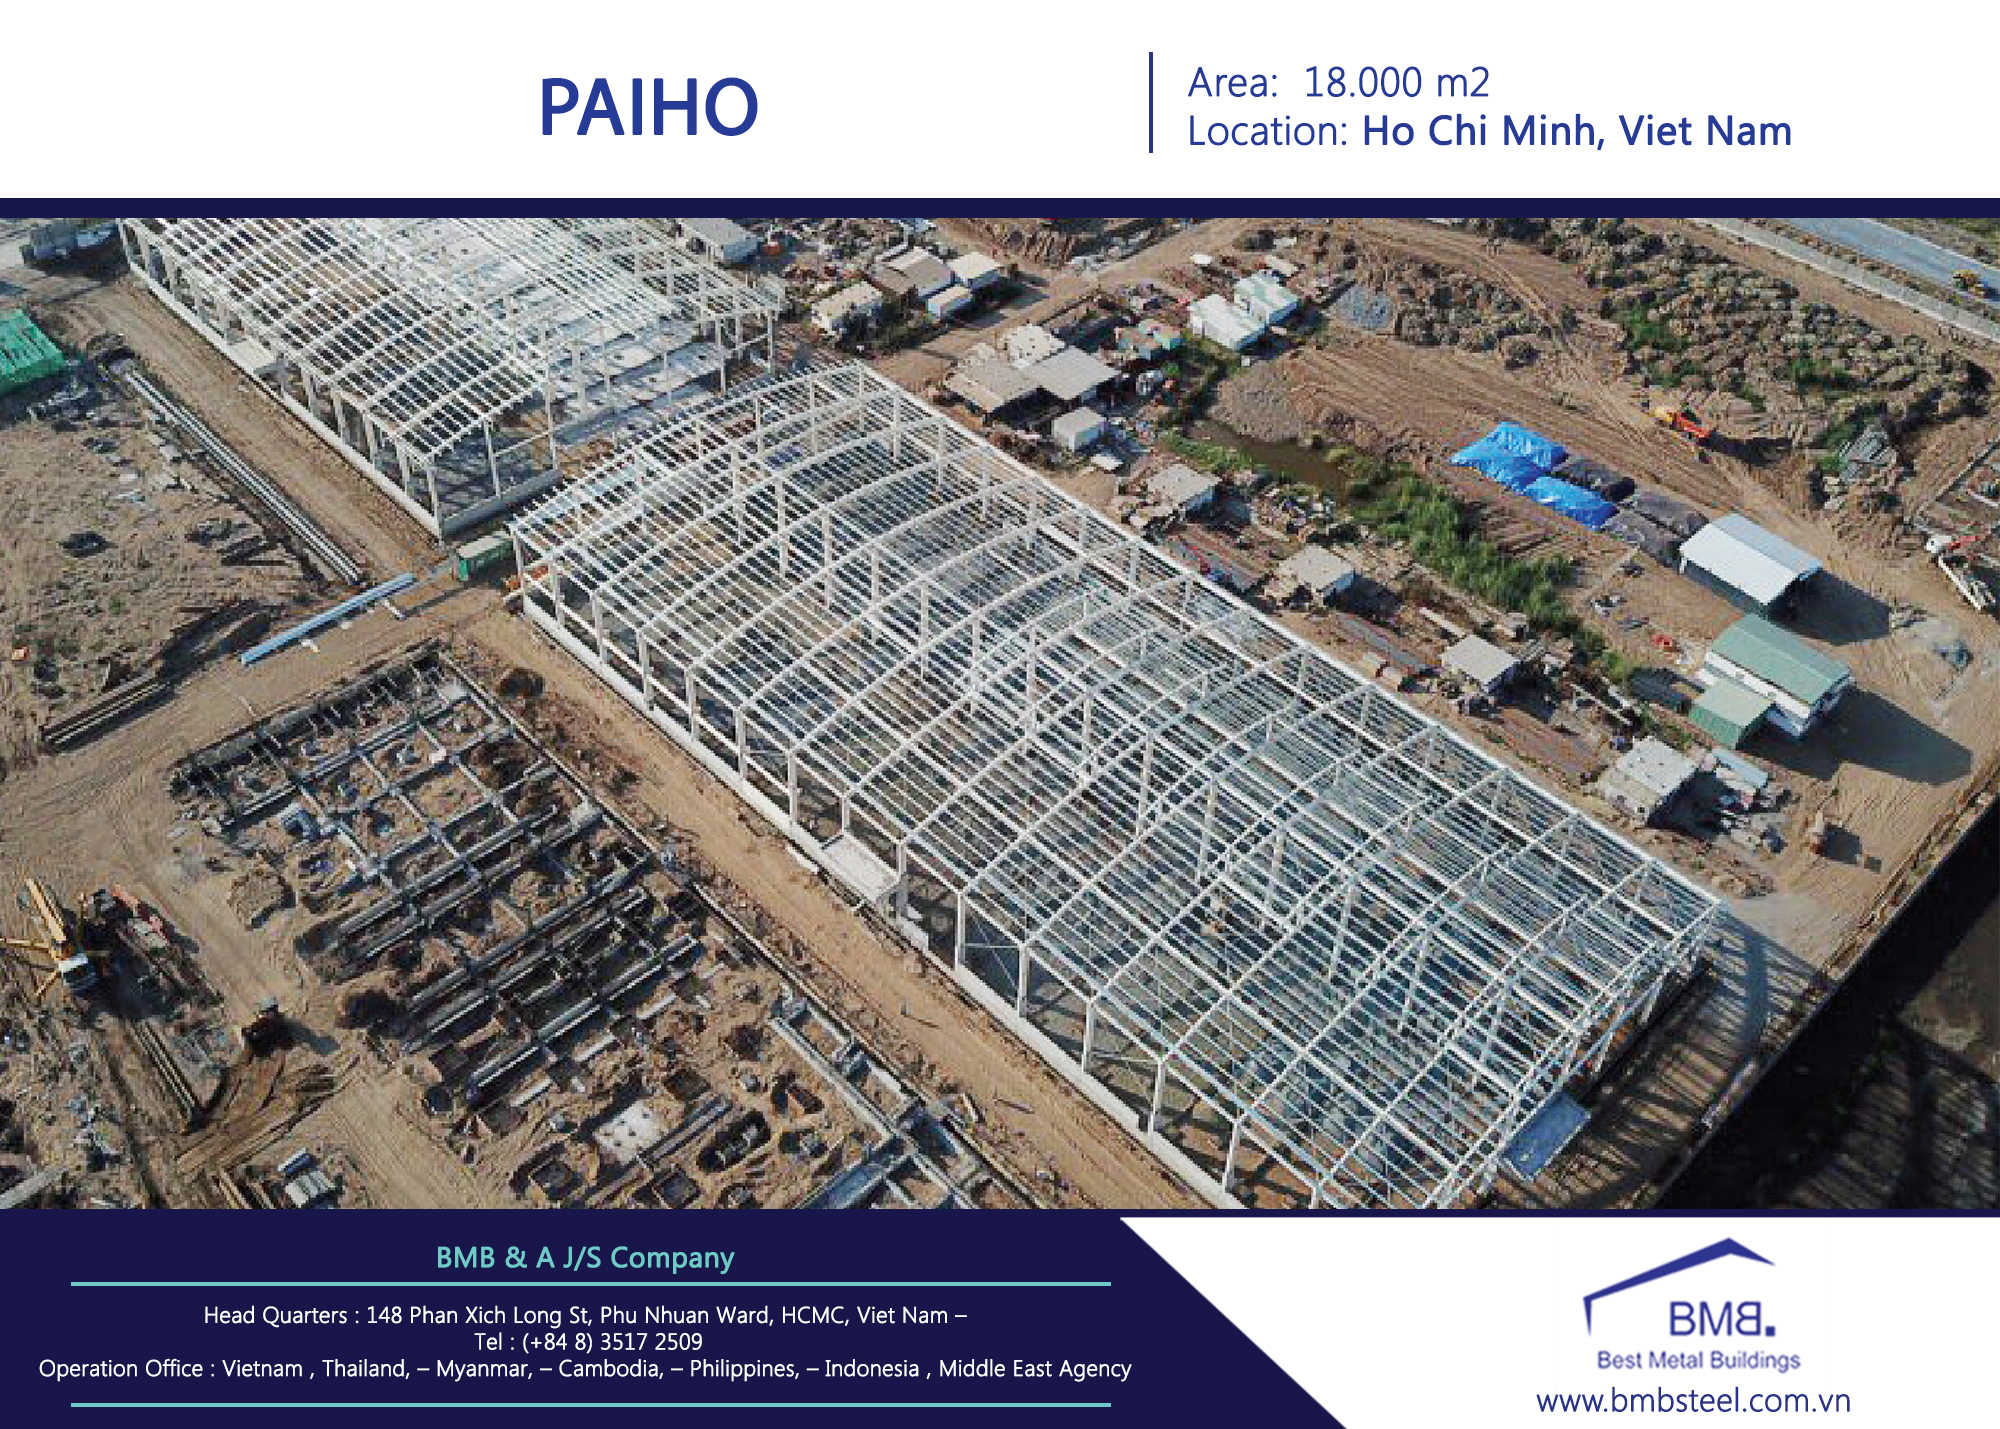 Paiho Project